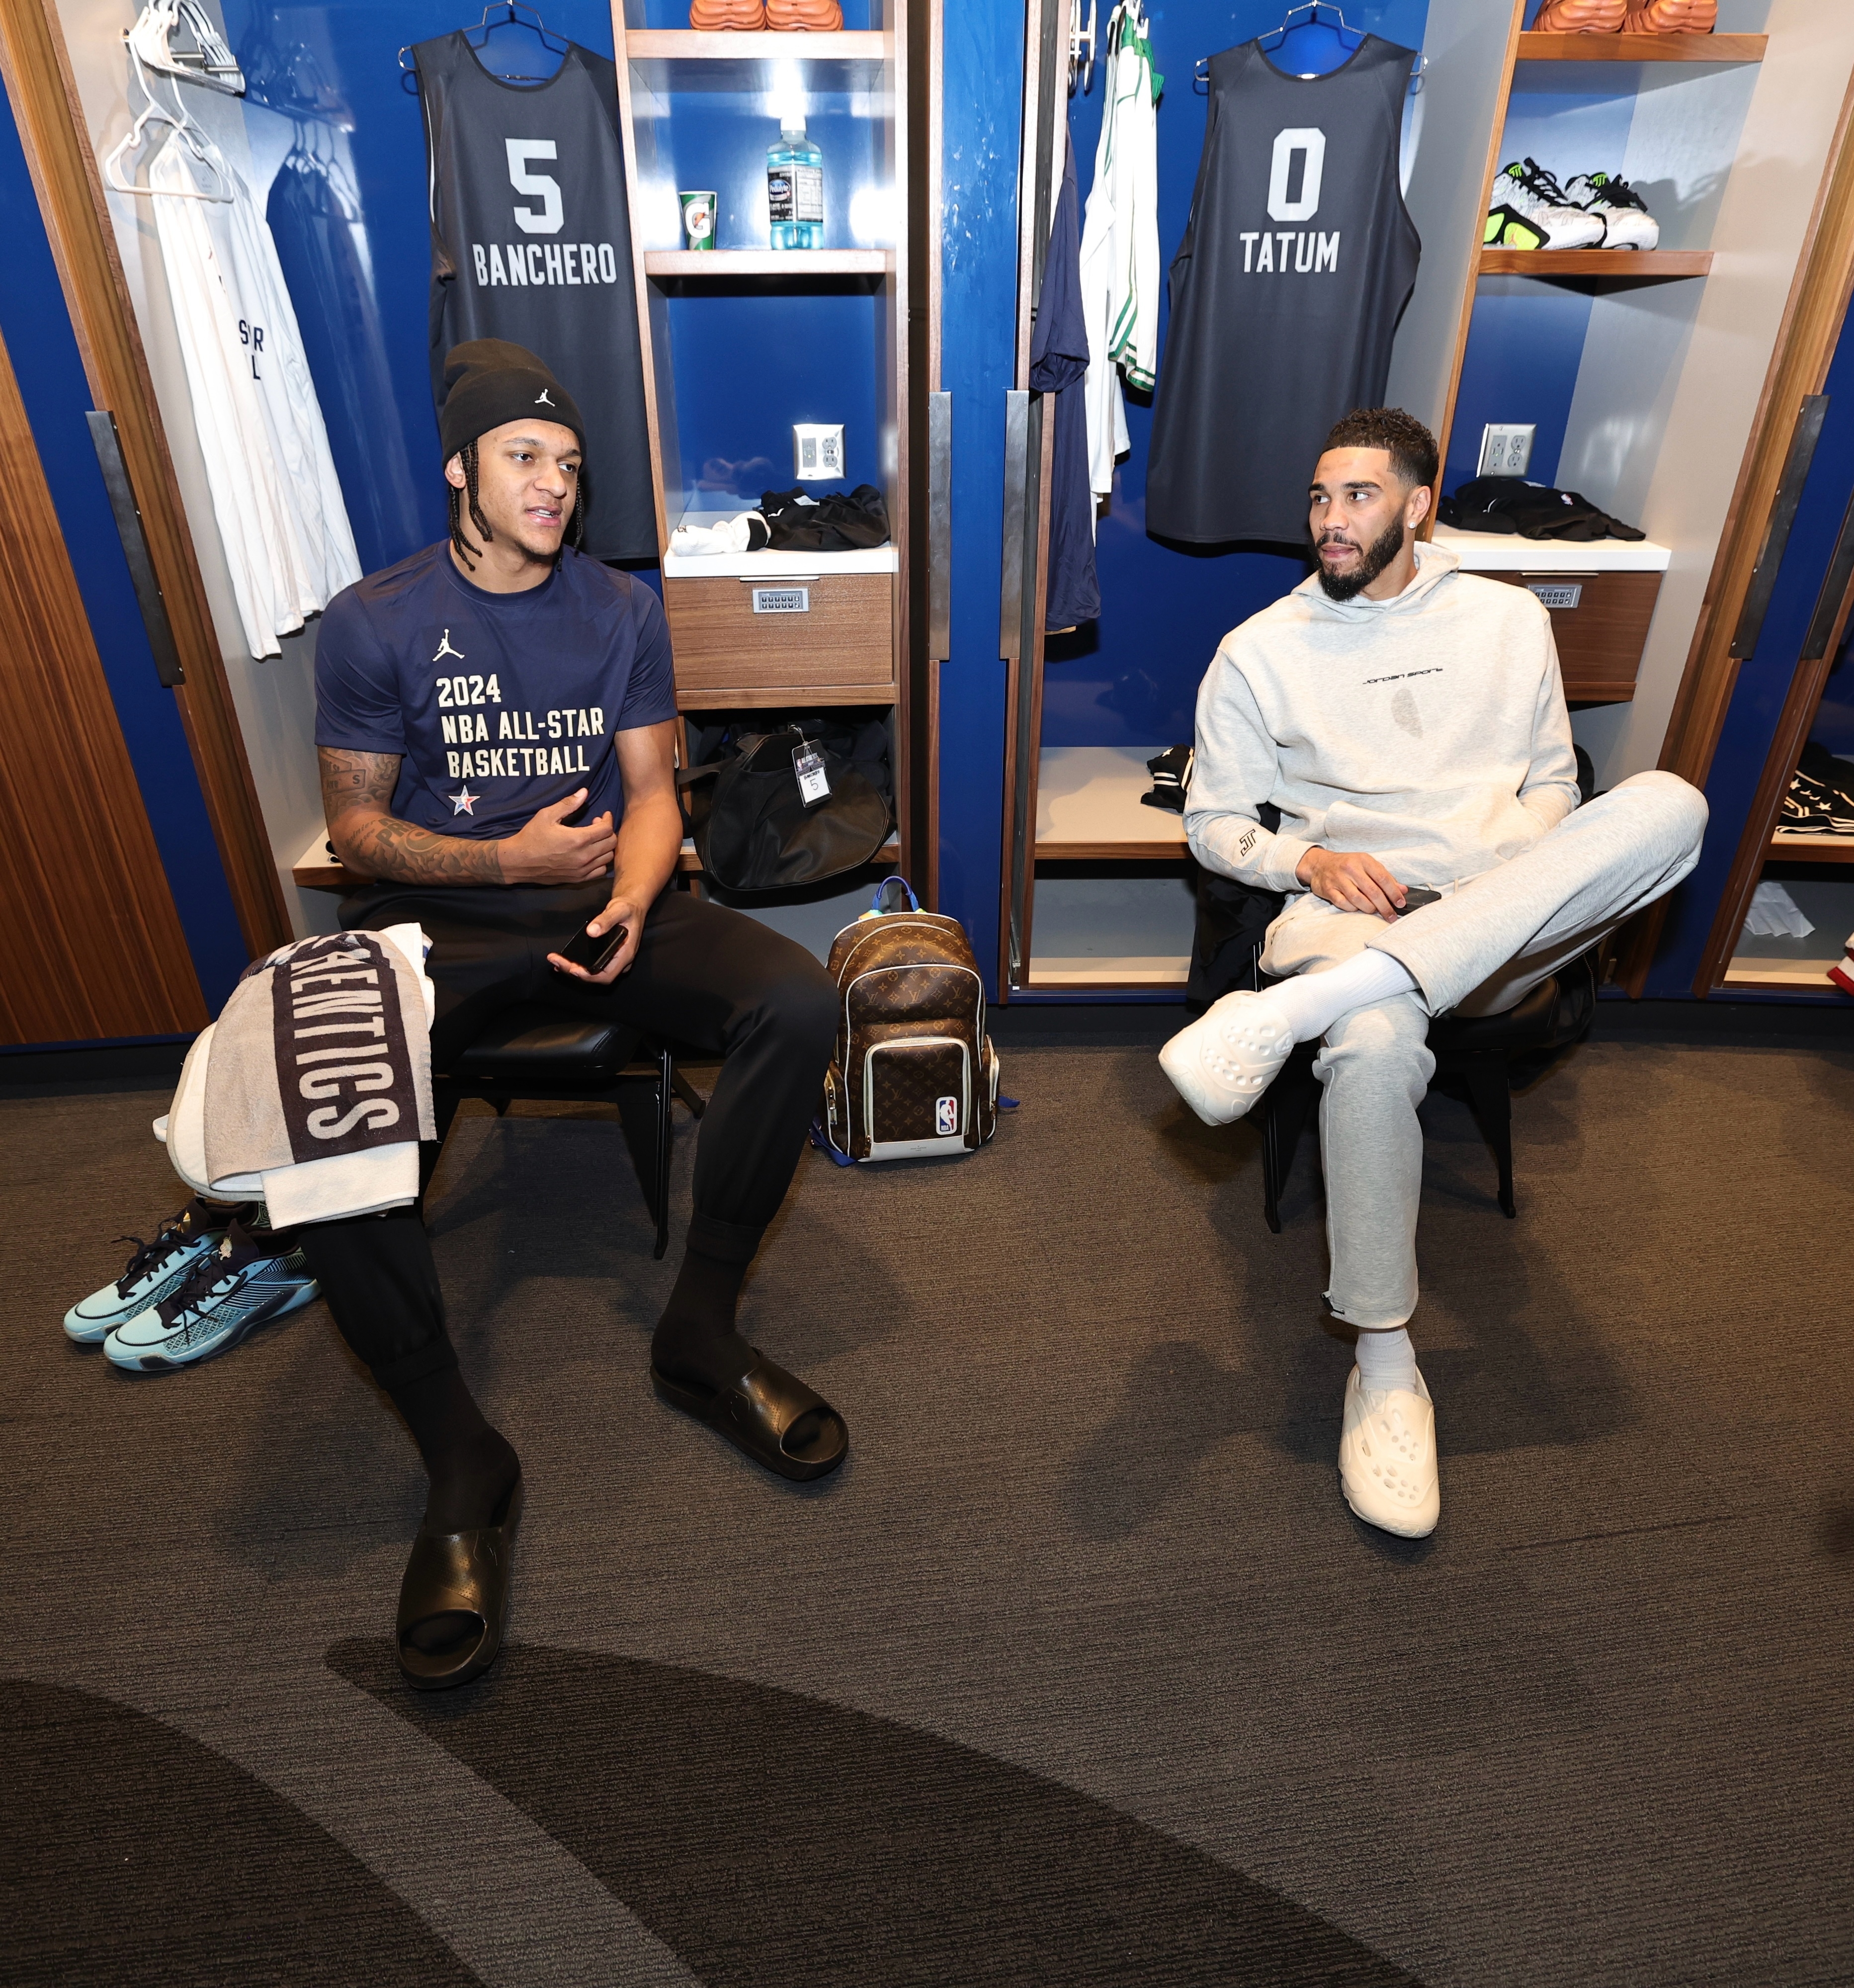 Two athletes sitting in a locker room, one in a navy NBA All-Star shirt, the other in a gray sweat outfit